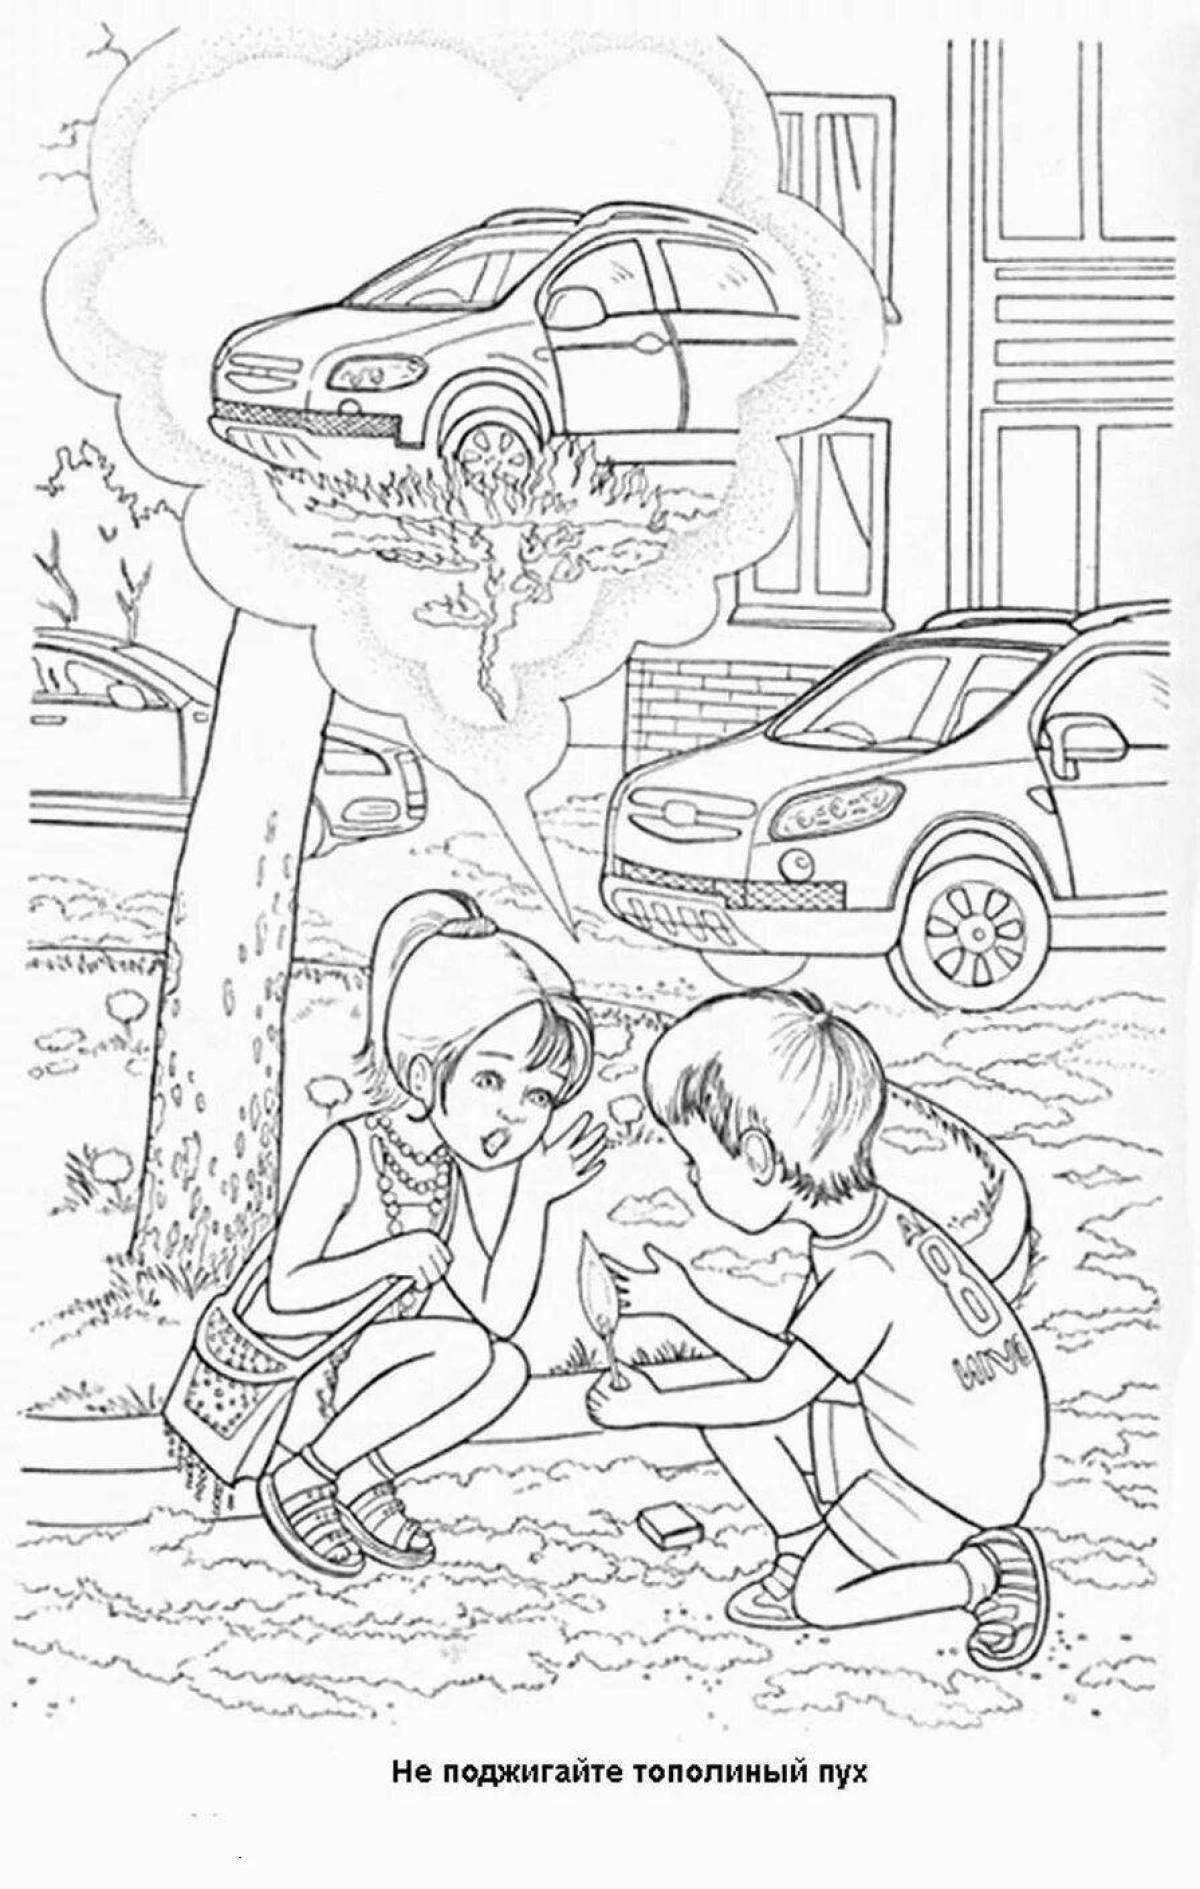 Amazing fire safety coloring page